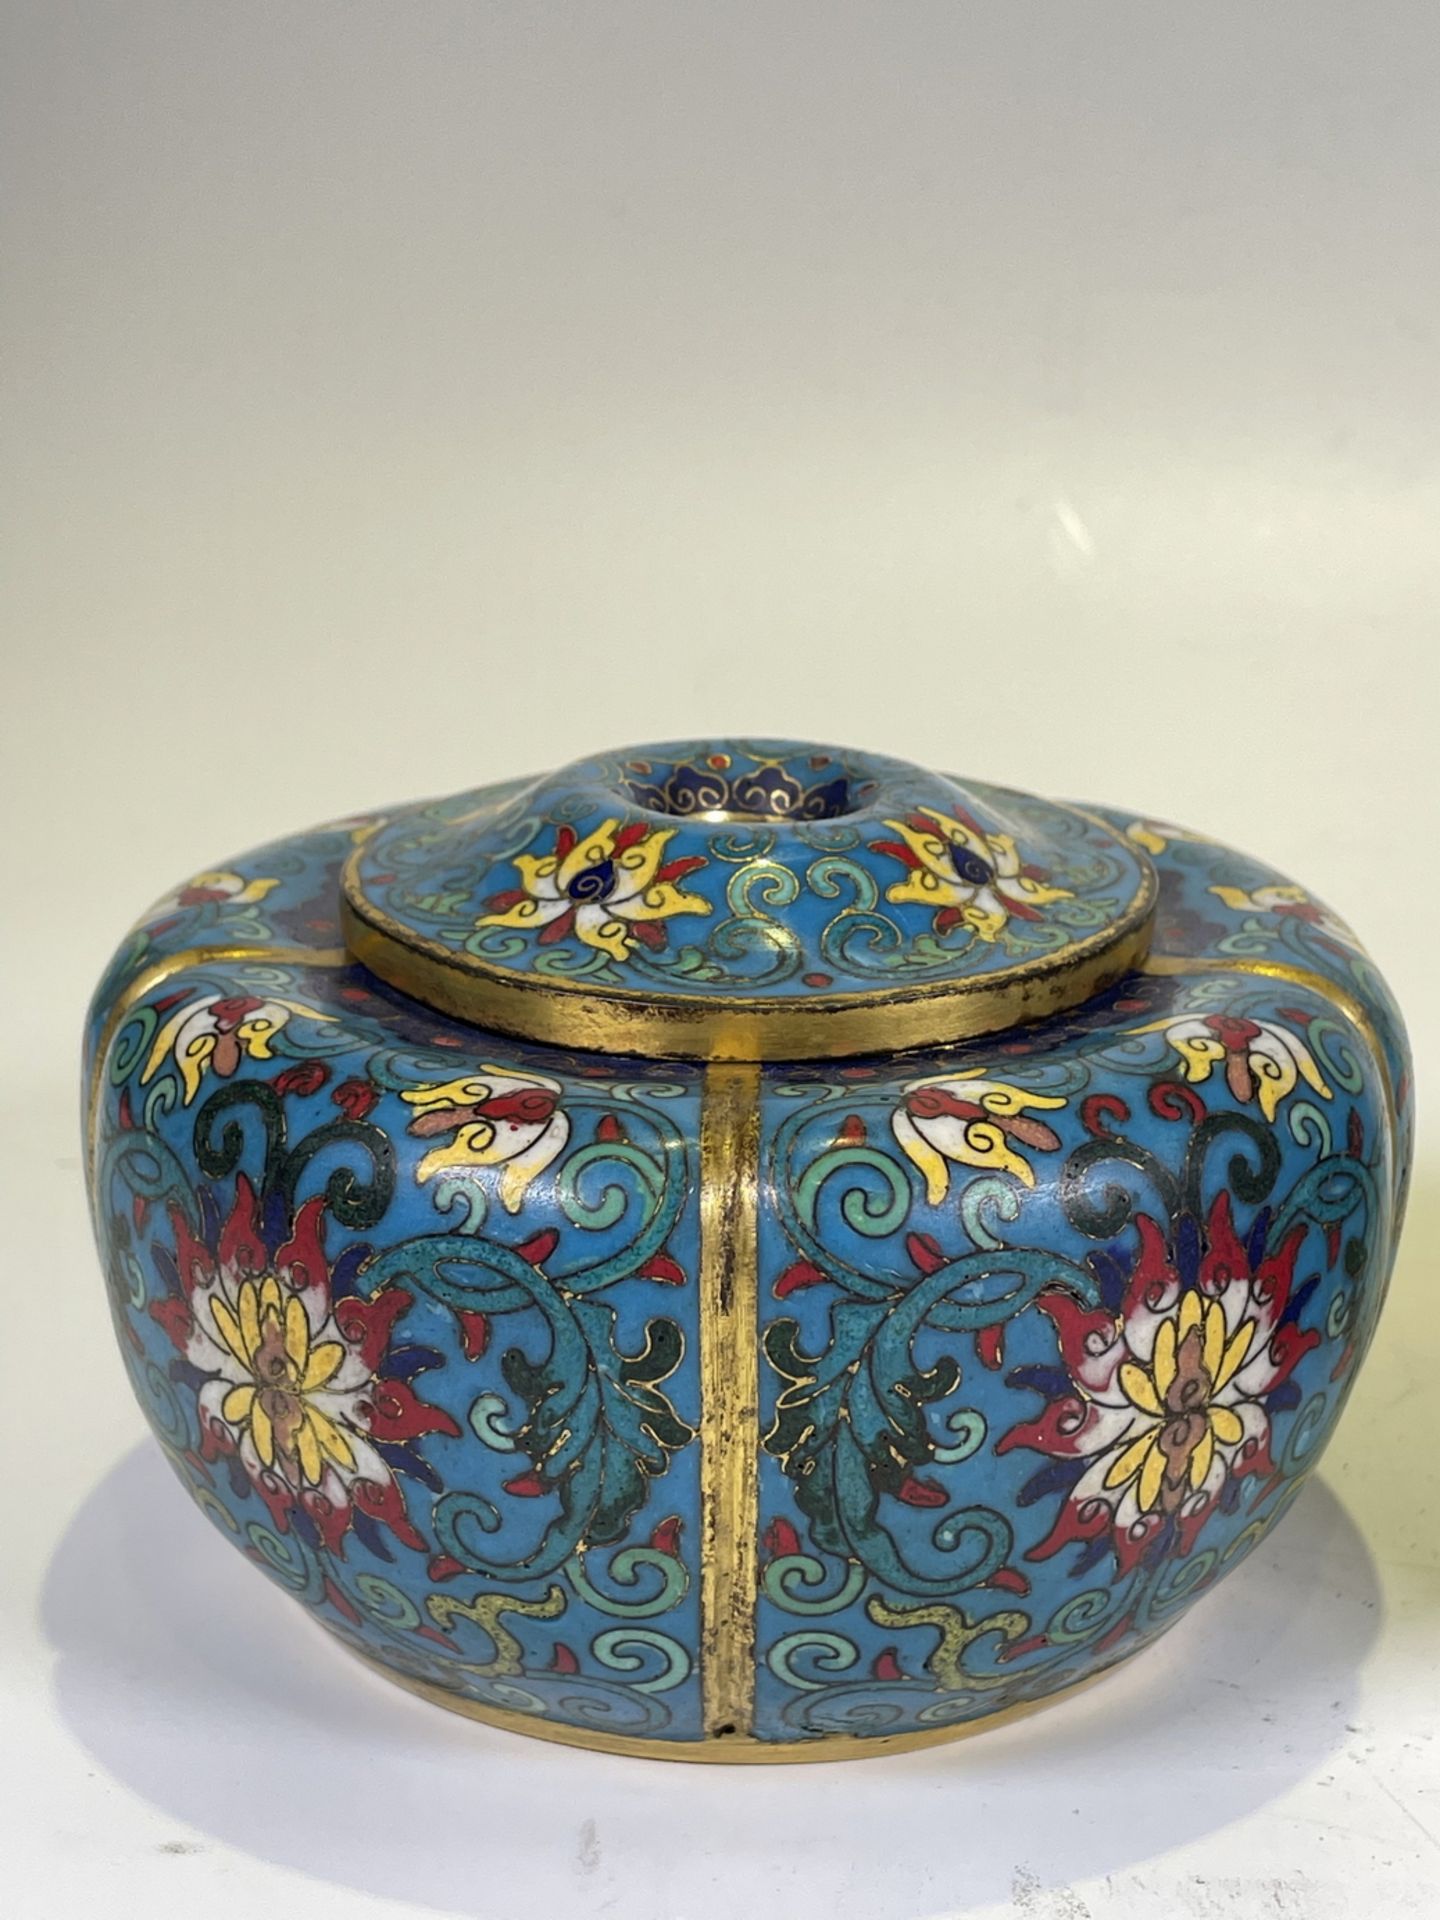 FINE CHINESE CLOISONNE, 18TH/19TH Century Pr. Collection of NARA private gallary.  - Image 5 of 6